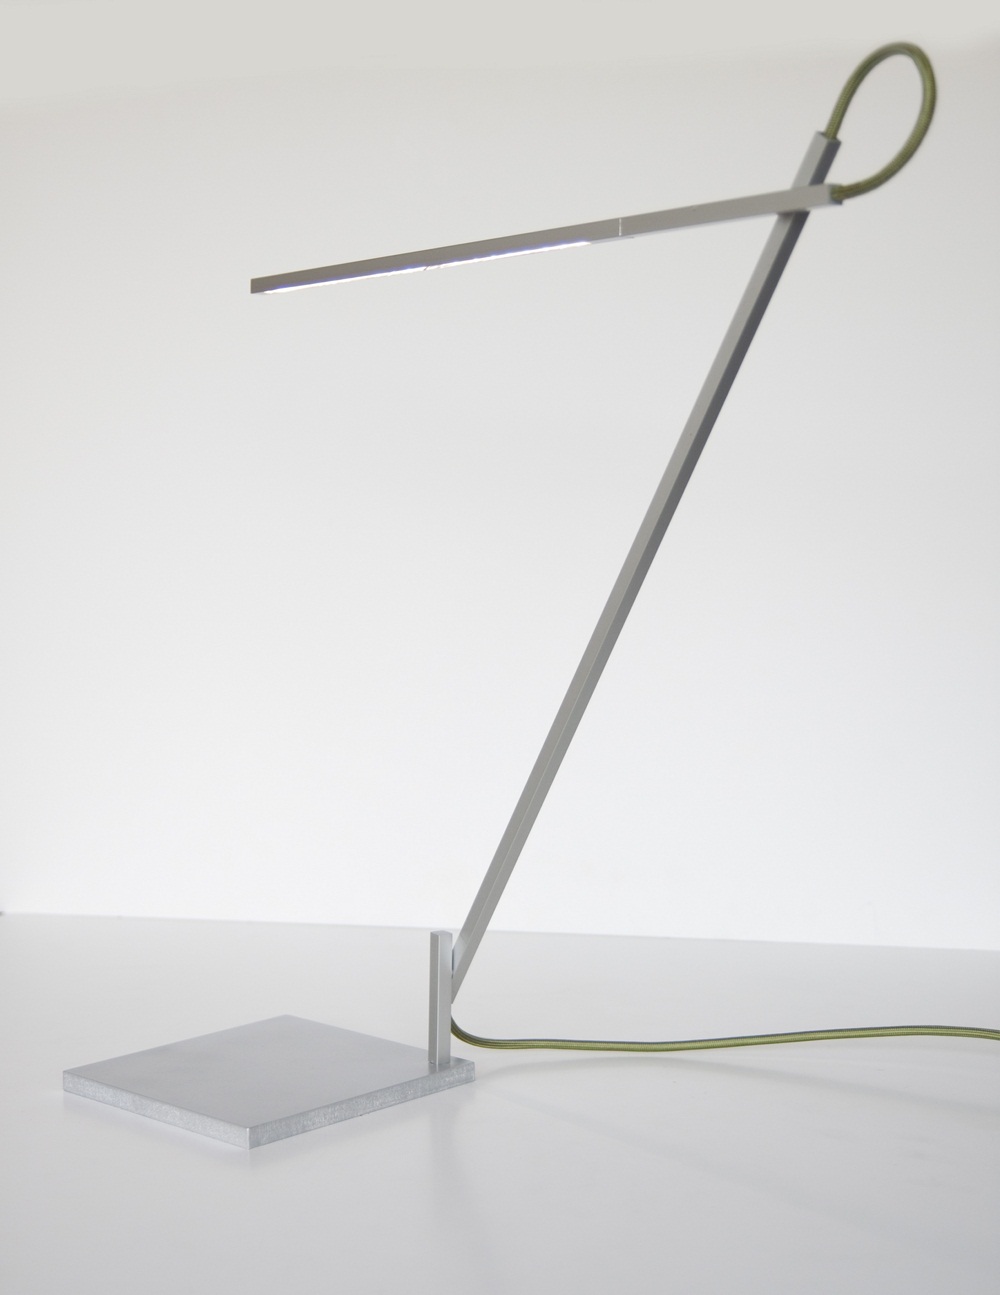 Archisearch - Linelight is a flexible, everyday LED light for home or office use. It is made with off-the-shelf aluminium components and can be manipulated into various forms.